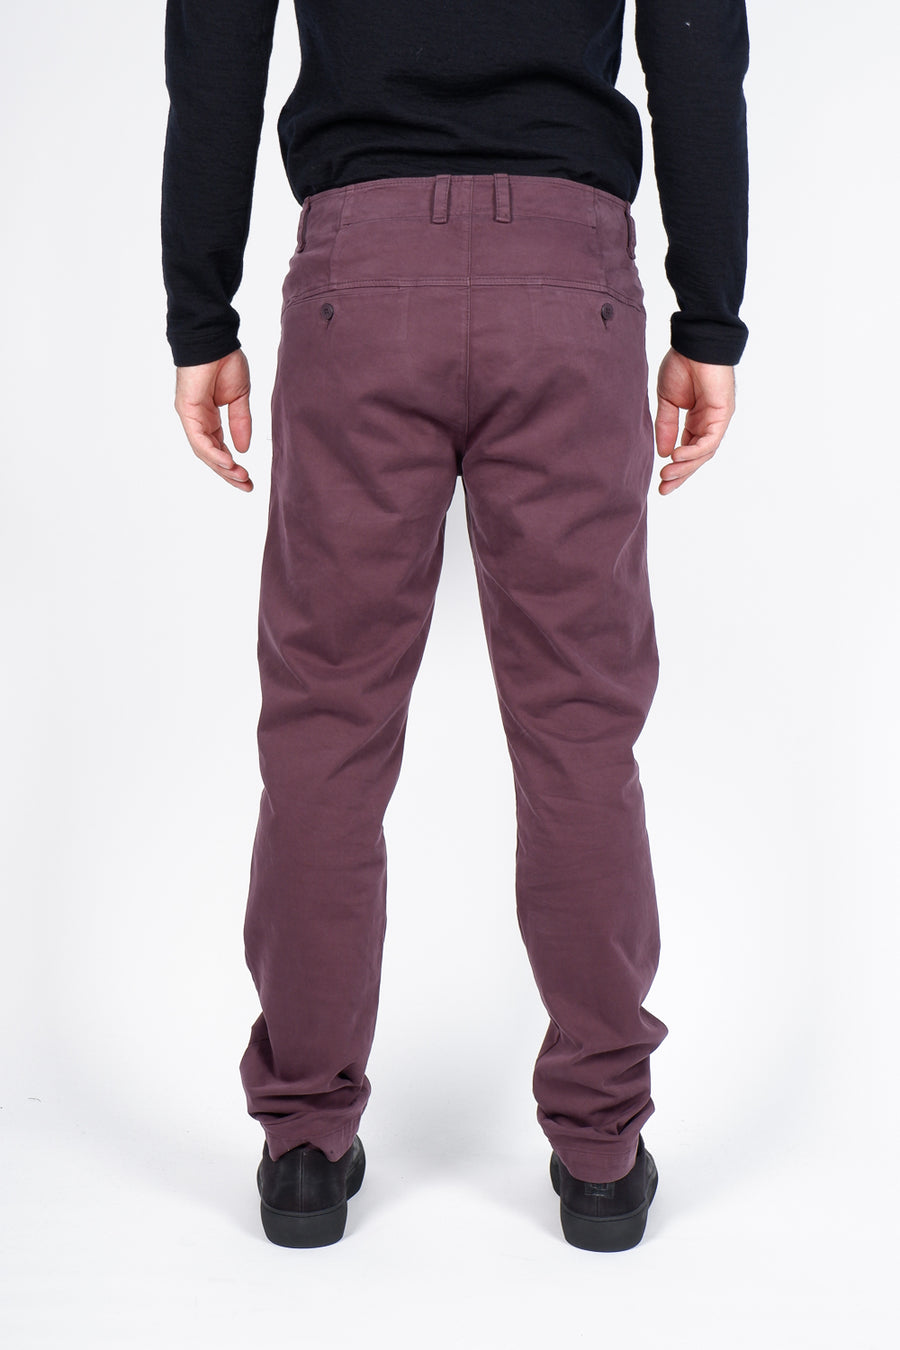 Buy the Transit Soft Cotton Chinos Burgundy at Intro. Spend £50 for free UK delivery. Official stockists. We ship worldwide.